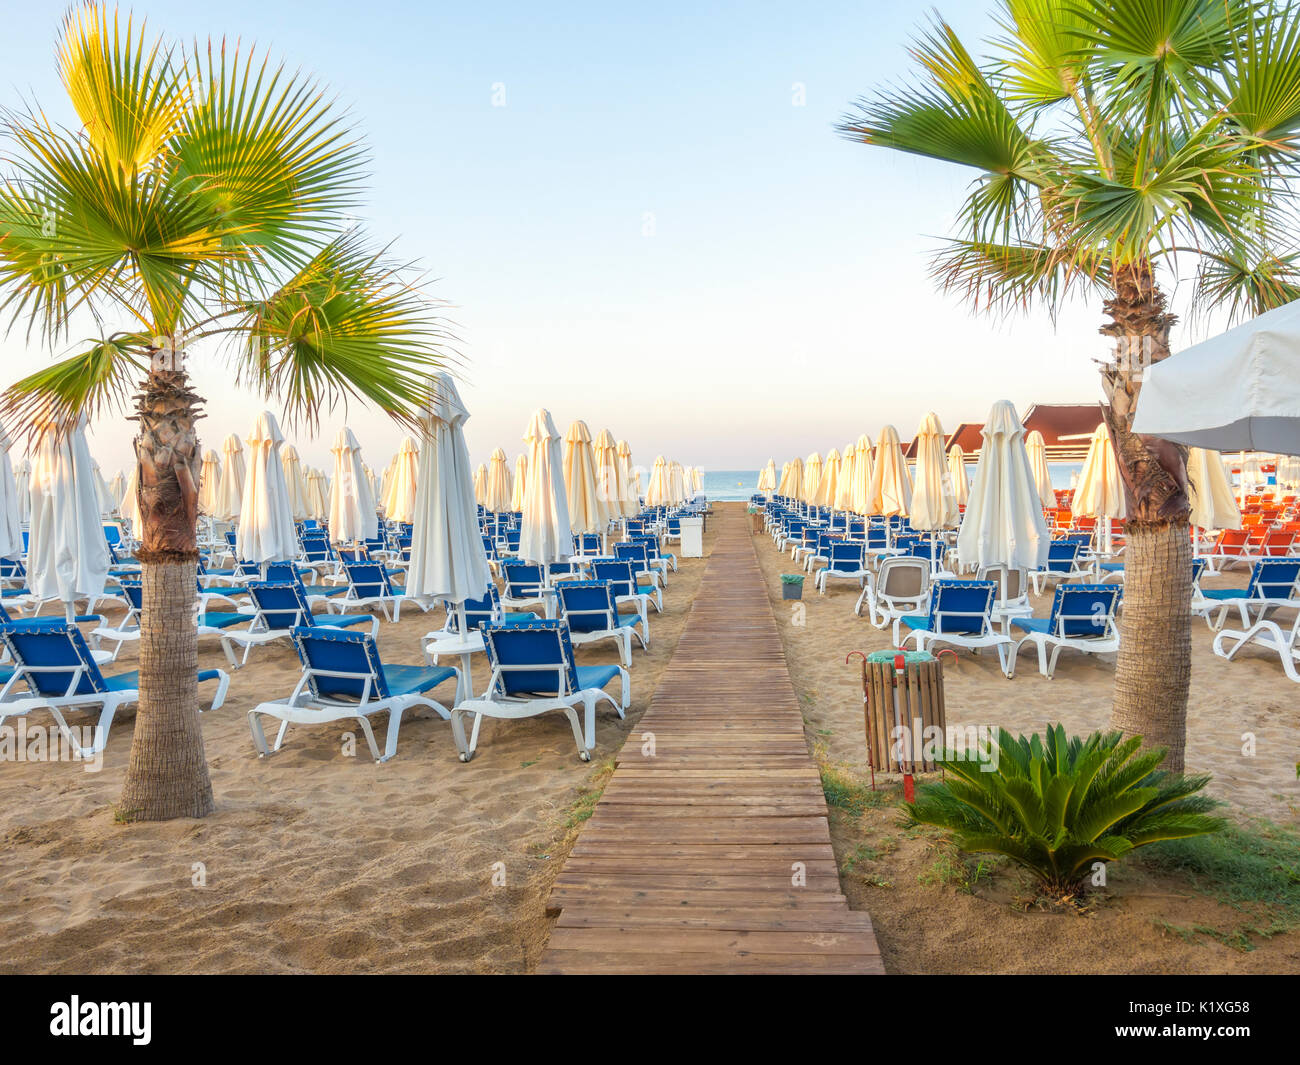 sandy beach to sea with wooden footpath, sun beds, umbrellas, palm trees, Turkey, Side resort Stock Photo